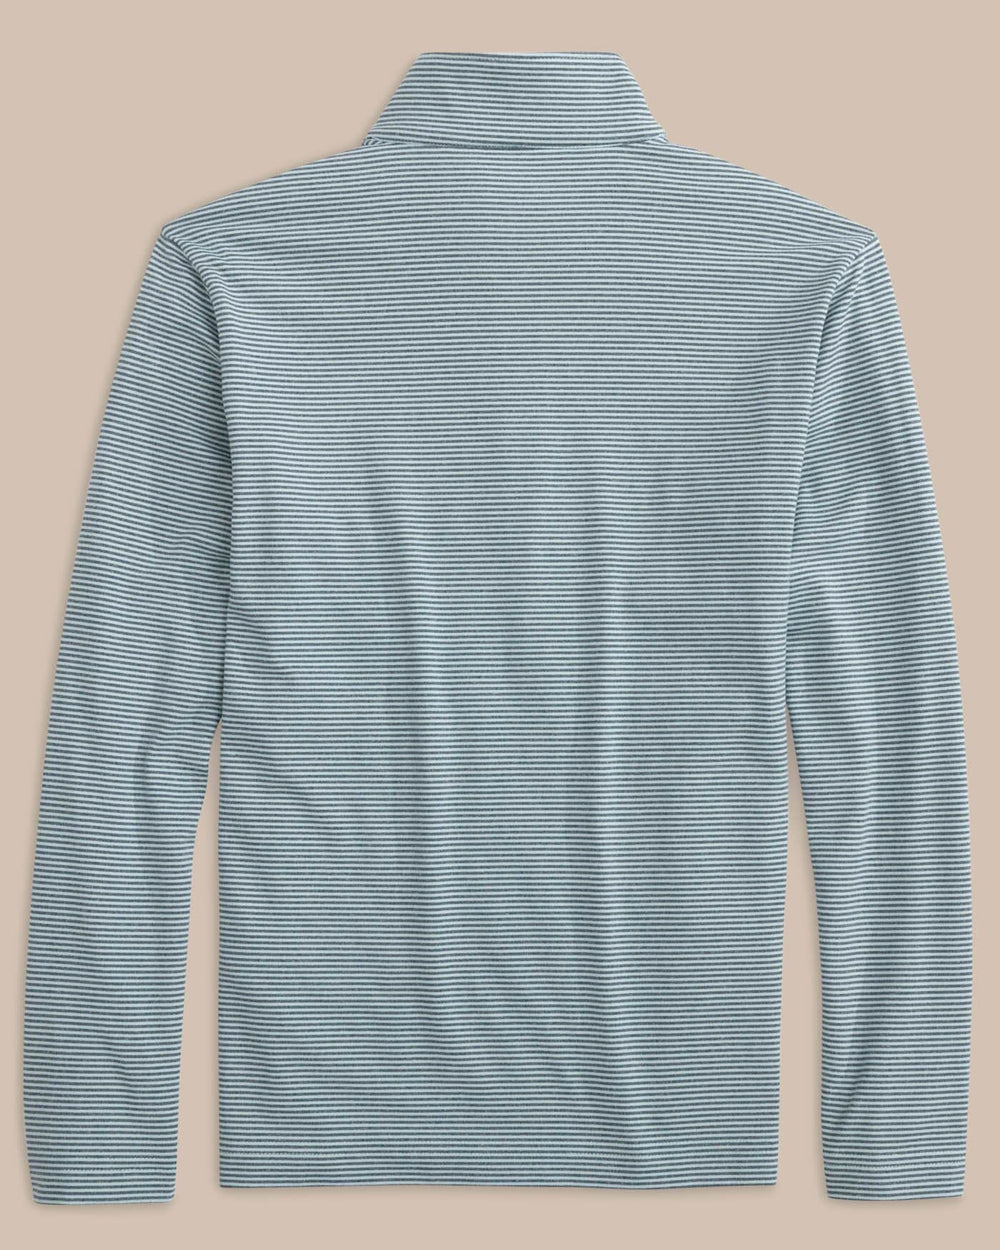 The back view of the Southern Tide Boys Cruiser Heather Micro-Stripe Quarter Zip Pullover by Southern Tide - Heather Dream Blue